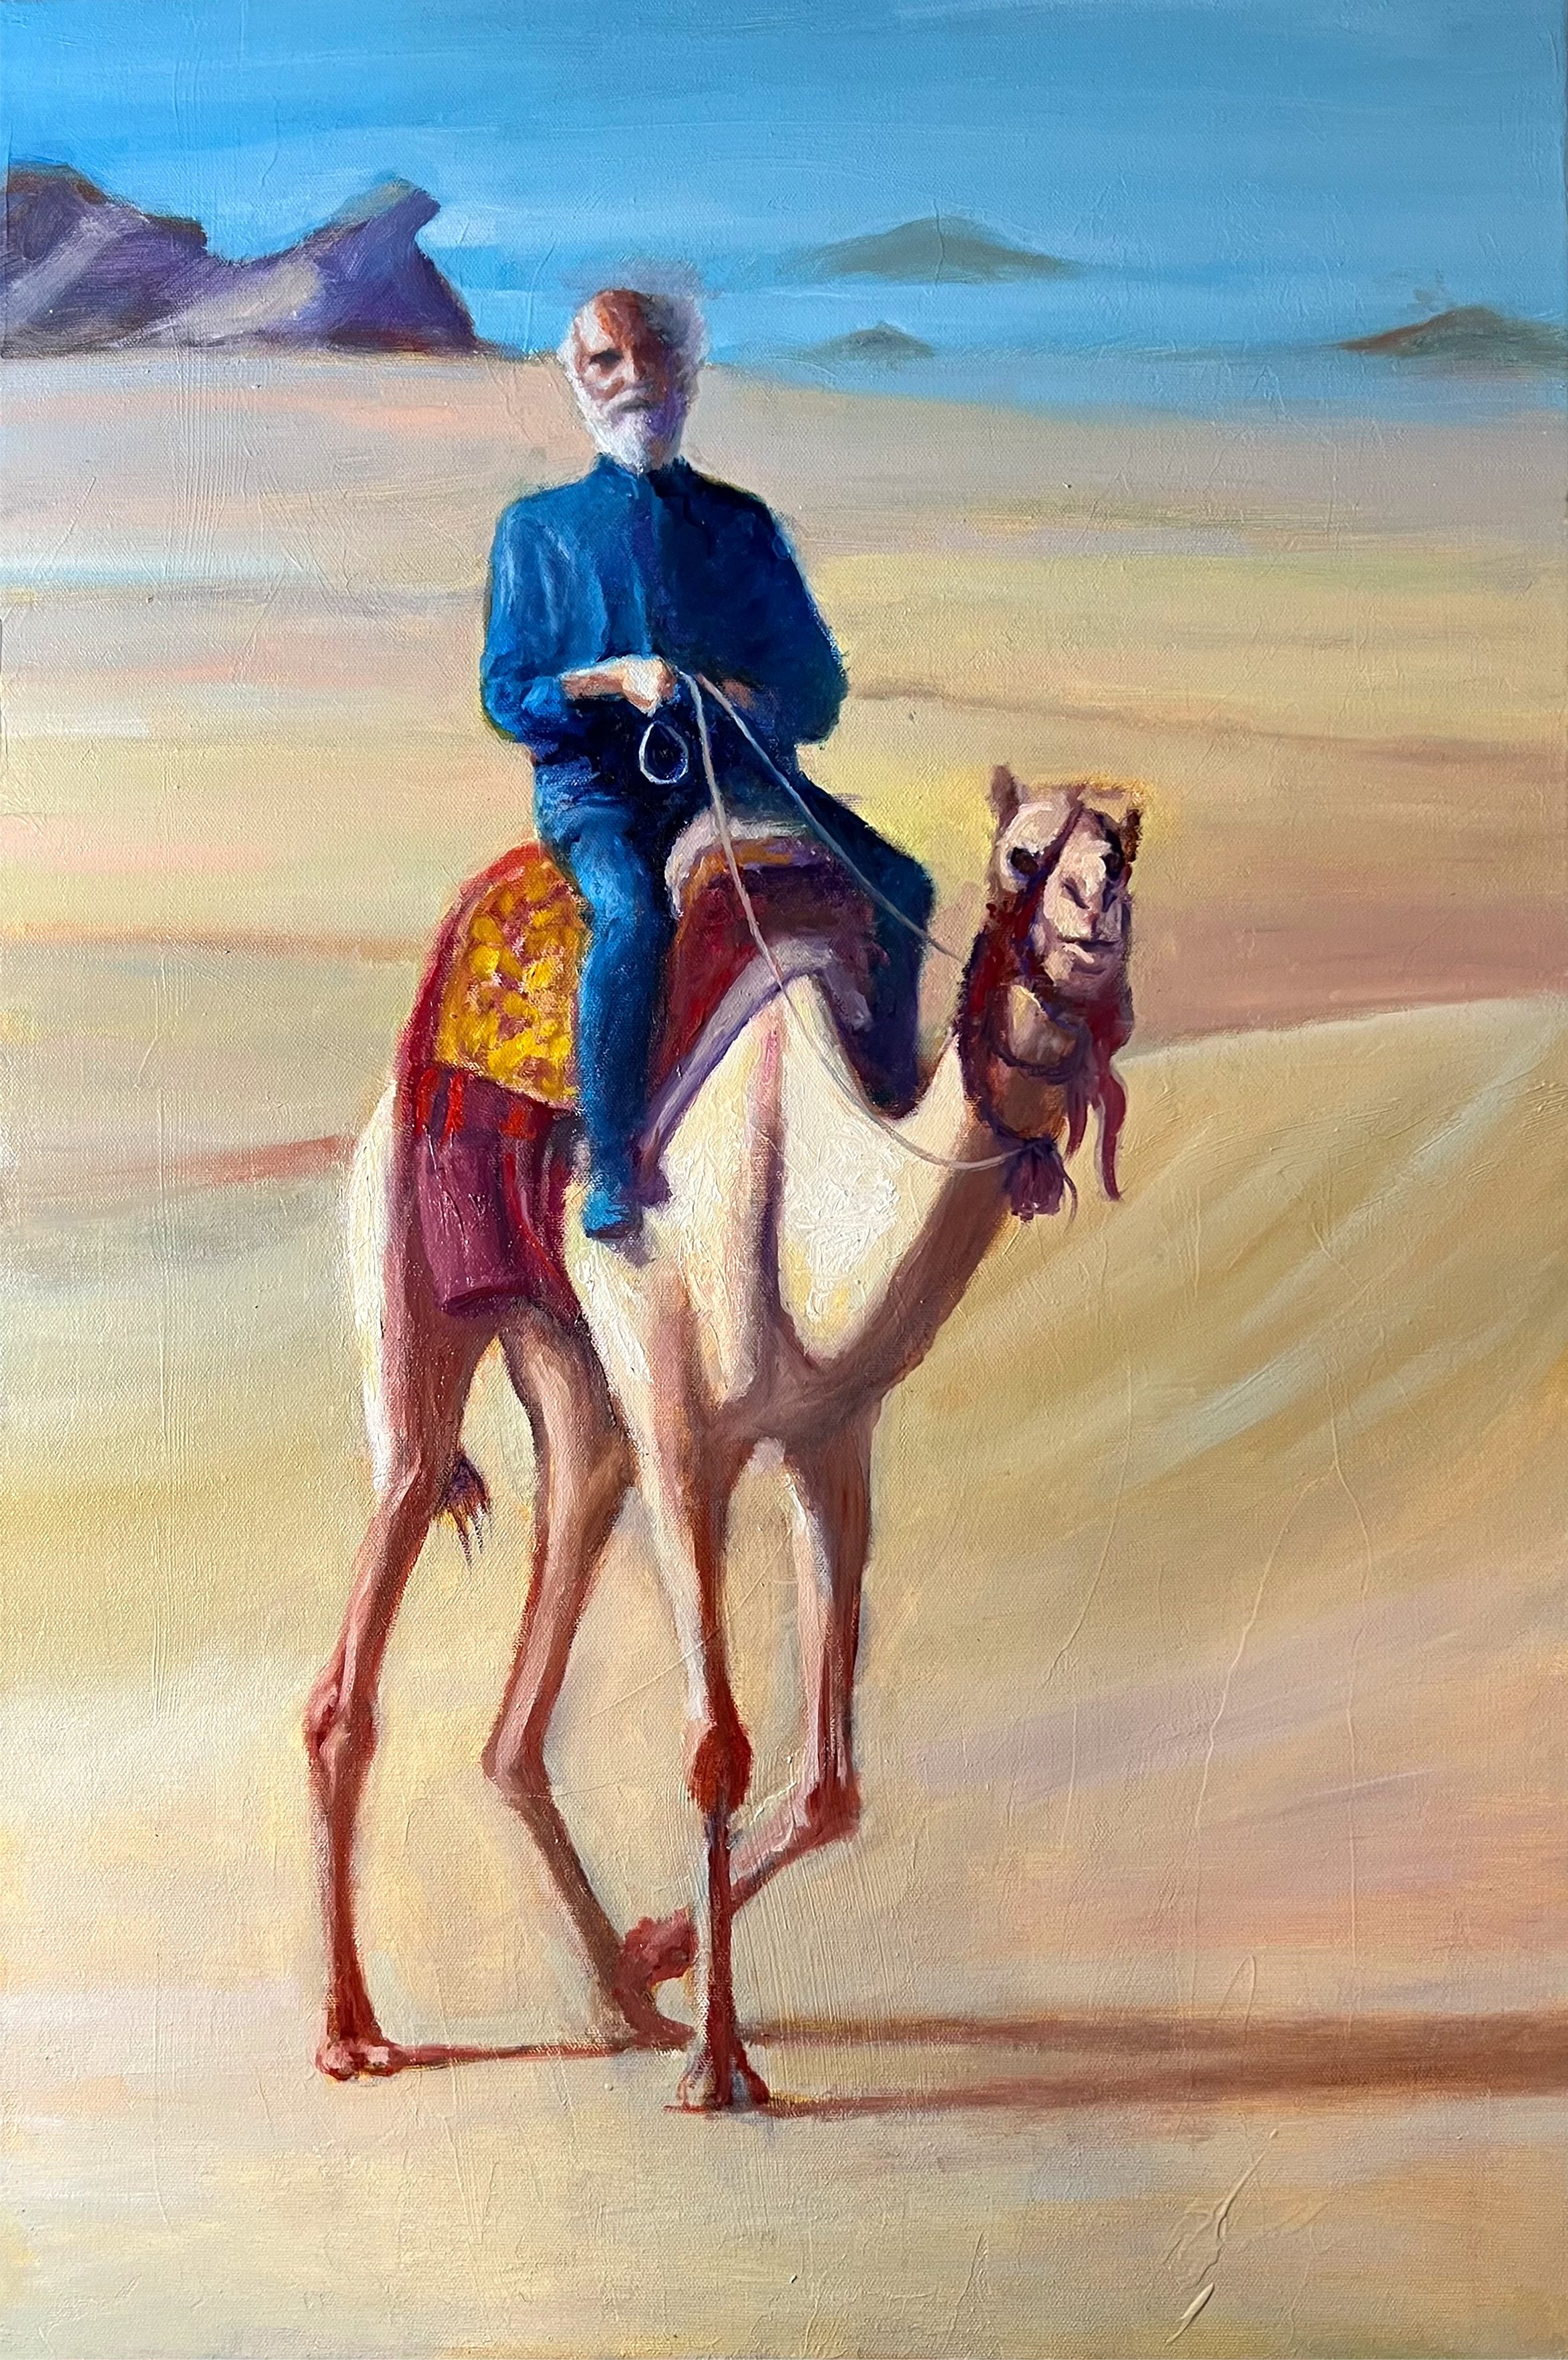 The Camel and the Rider